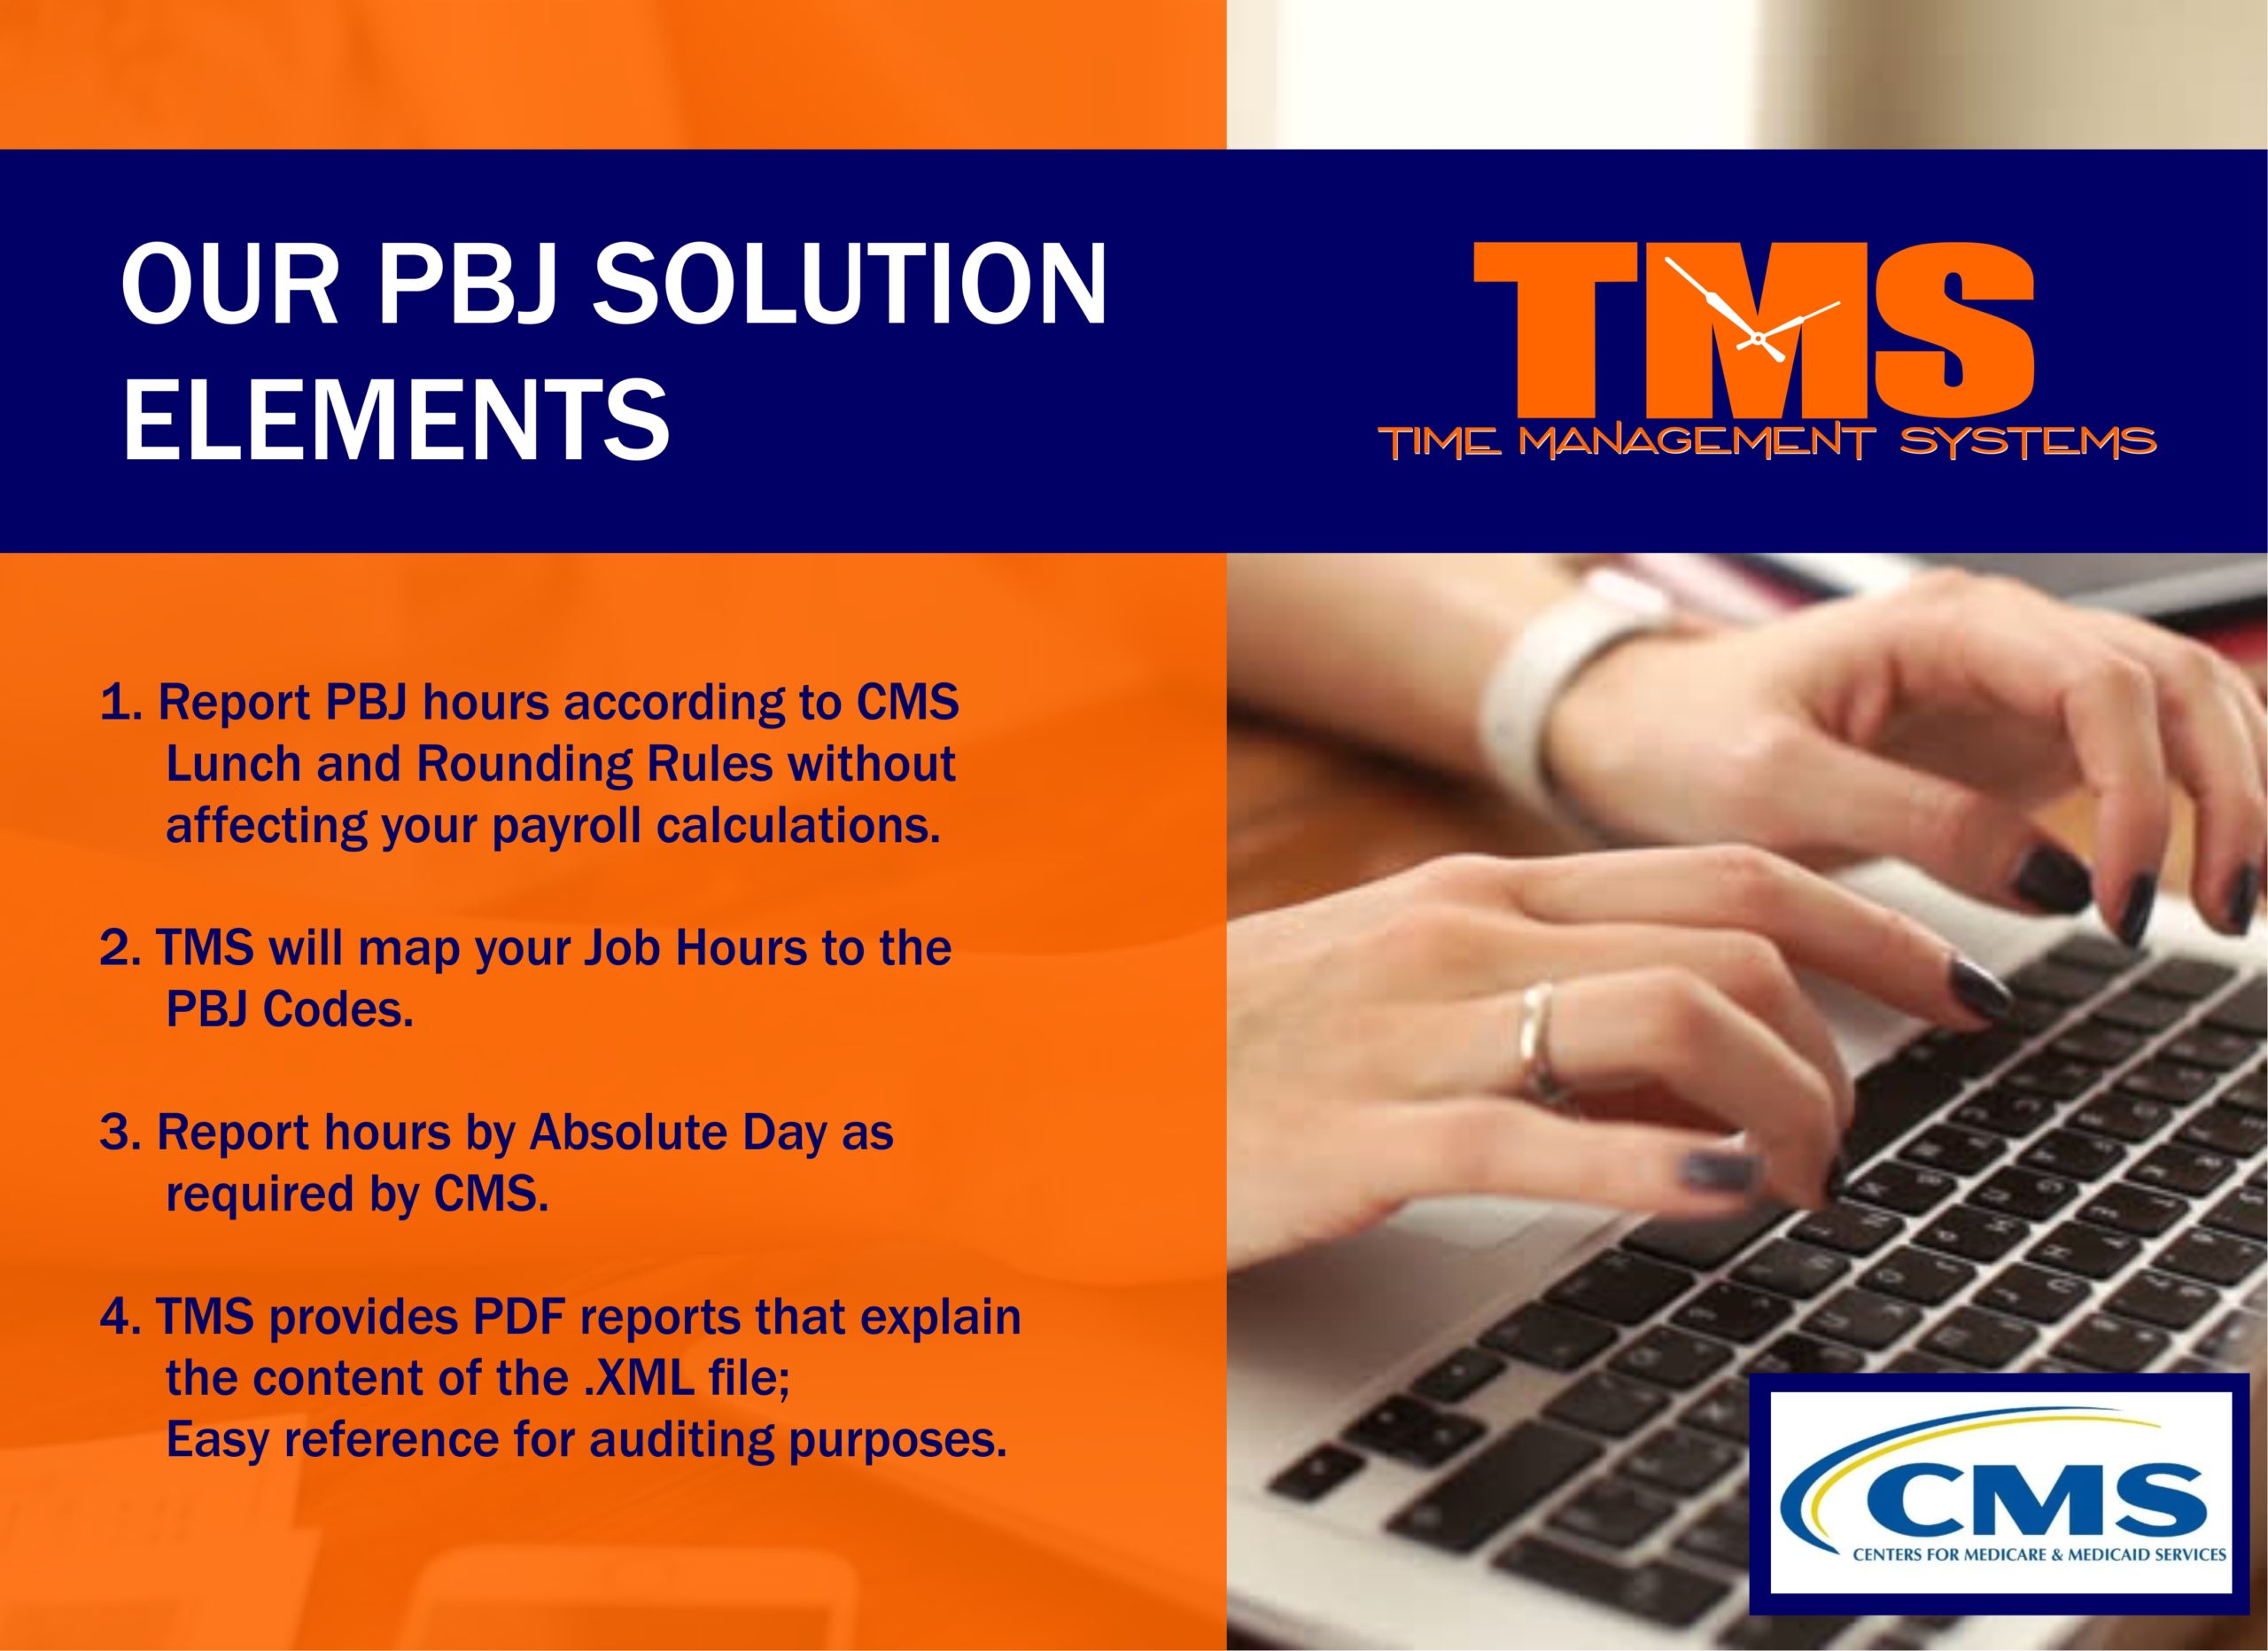 Our PBJ Solution Elements. 1.Report PBJ hours according to CMS Lunch and Rounding Rules without affecting your payroll calculations. 2. TMS will map your Job Hours to the PBJ Codes. 3. Report Hours by Absolute Day as required by CMS. 4. TMS provides PDF Reports that explain the content of the .XML file.